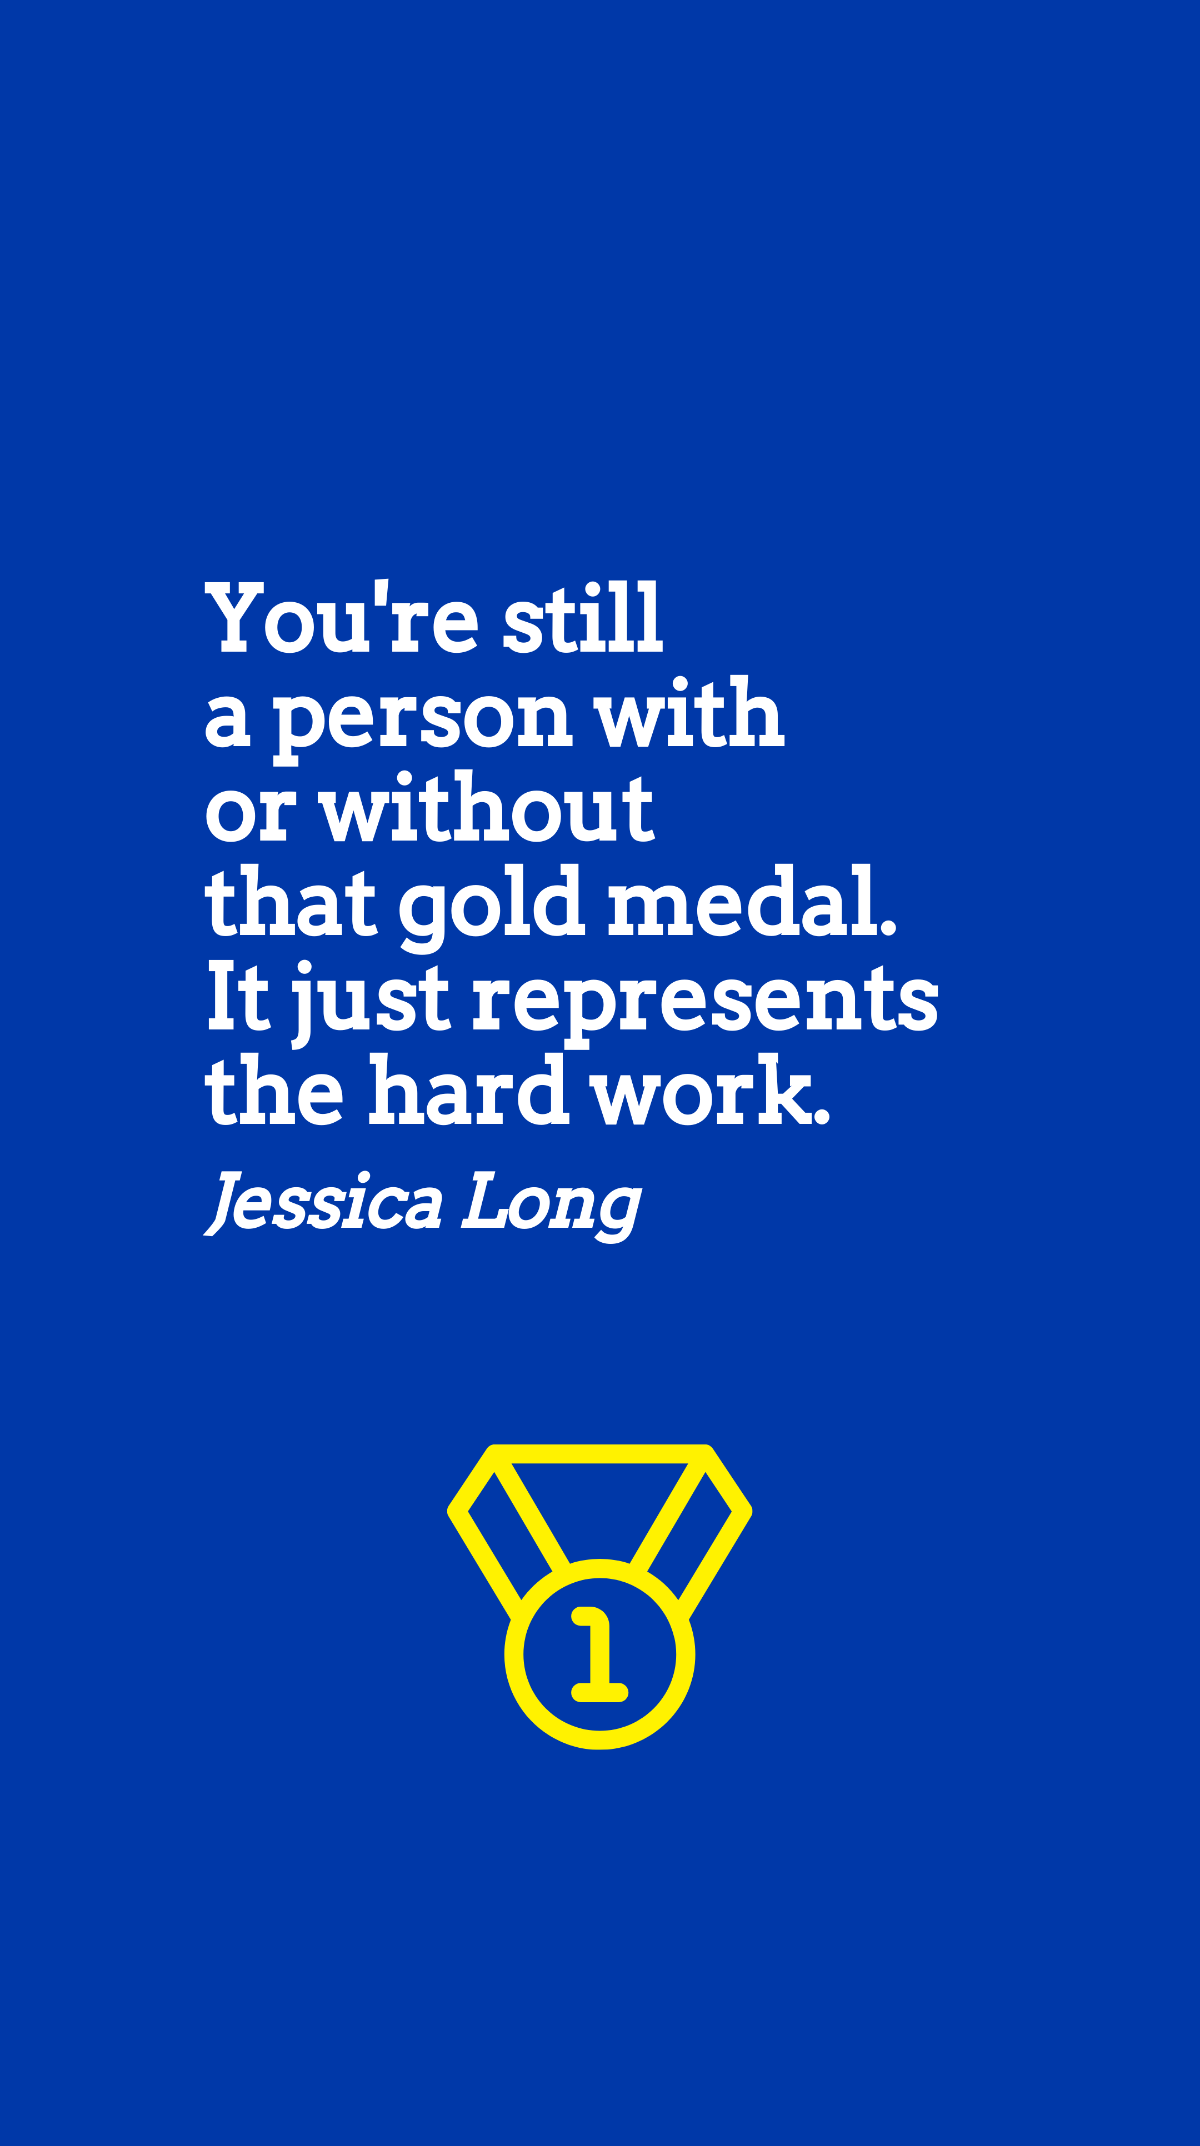 Jessica Long - You're still a person with or without that gold medal. It just represents the hard work.